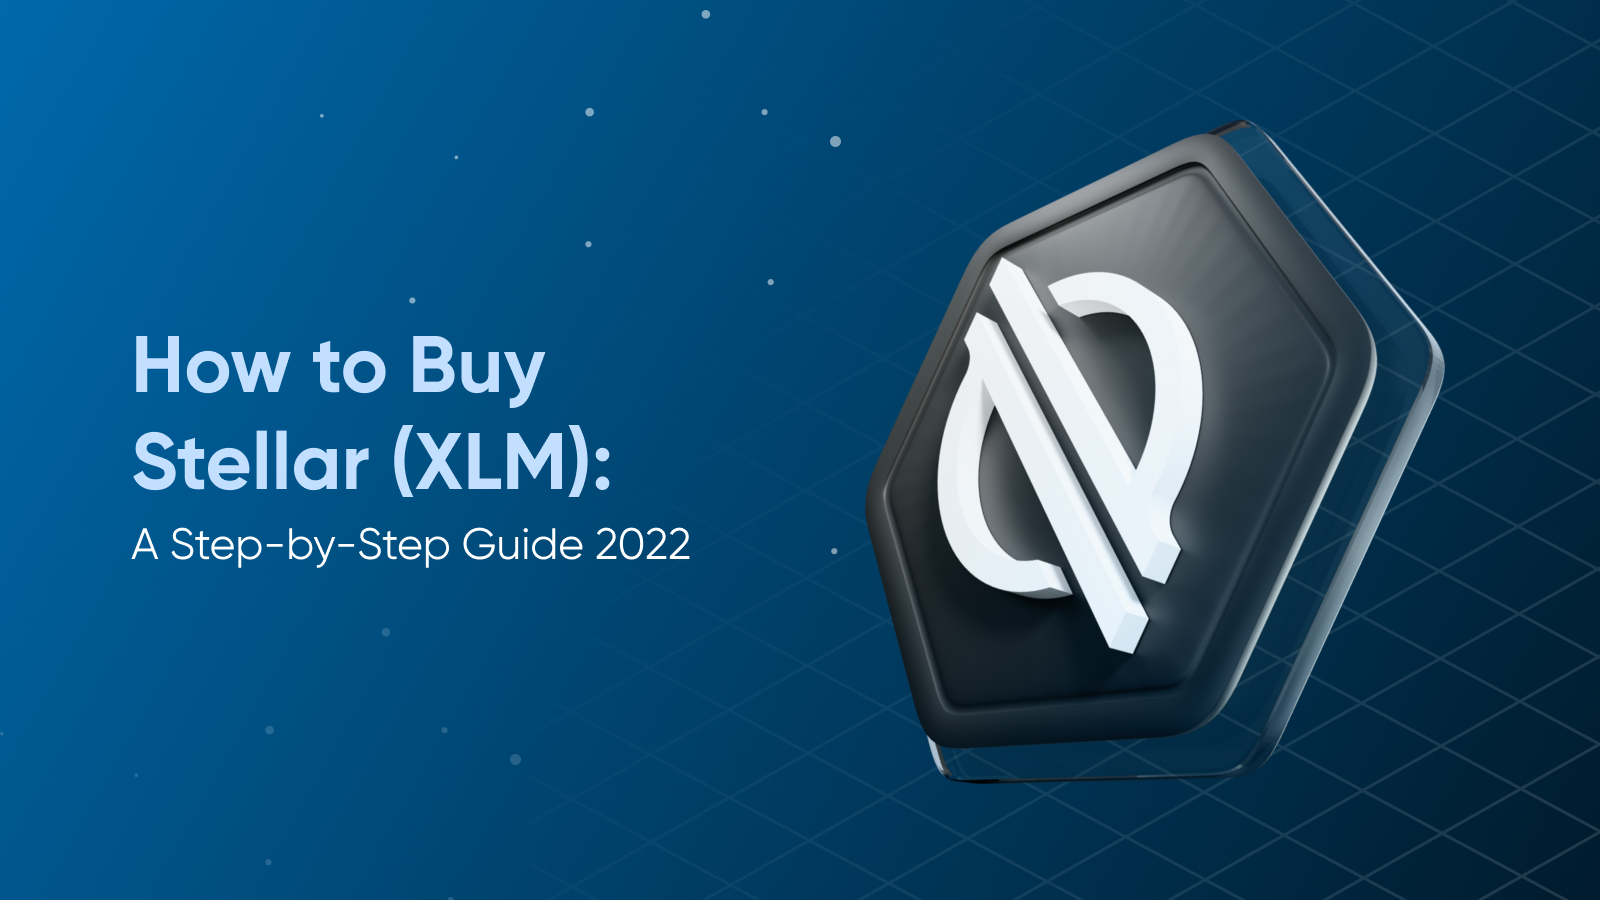 How to Buy Stellar (XLM): A Step-by-Step Guide 2022